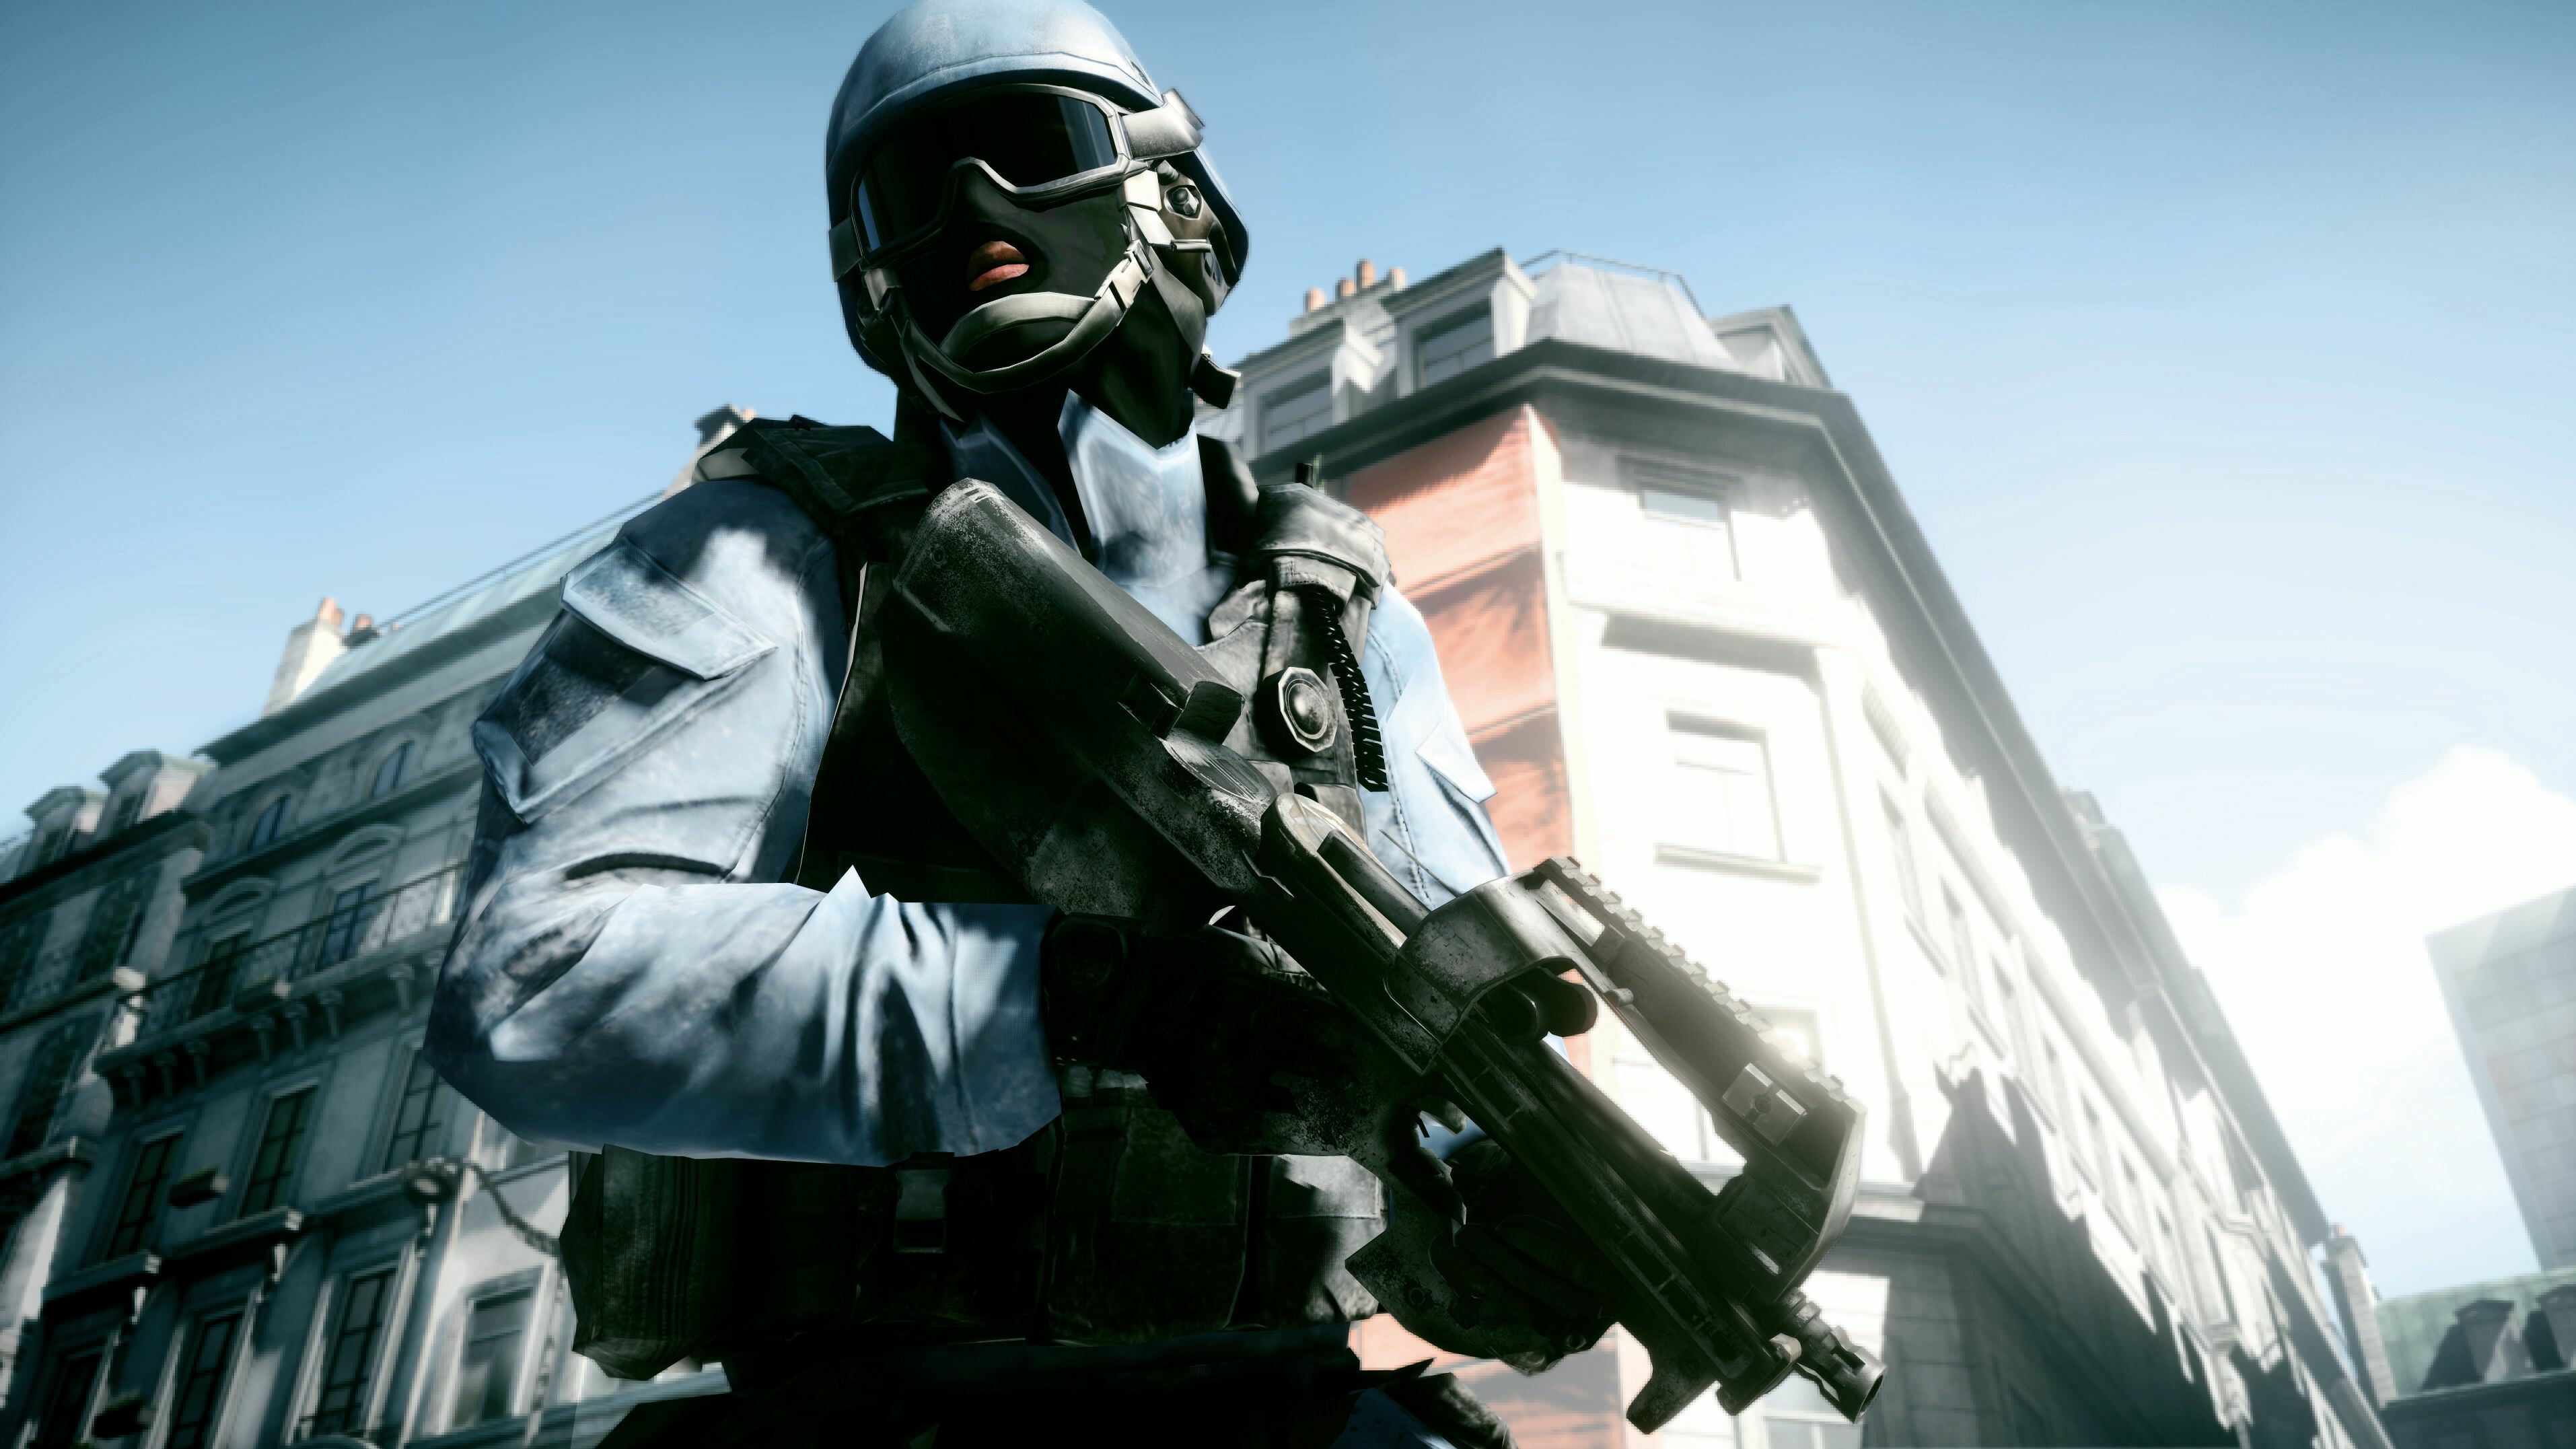 Battlefield 3: Players take on the personas of several military roles, A U.S. Marine. 3830x2160 HD Background.